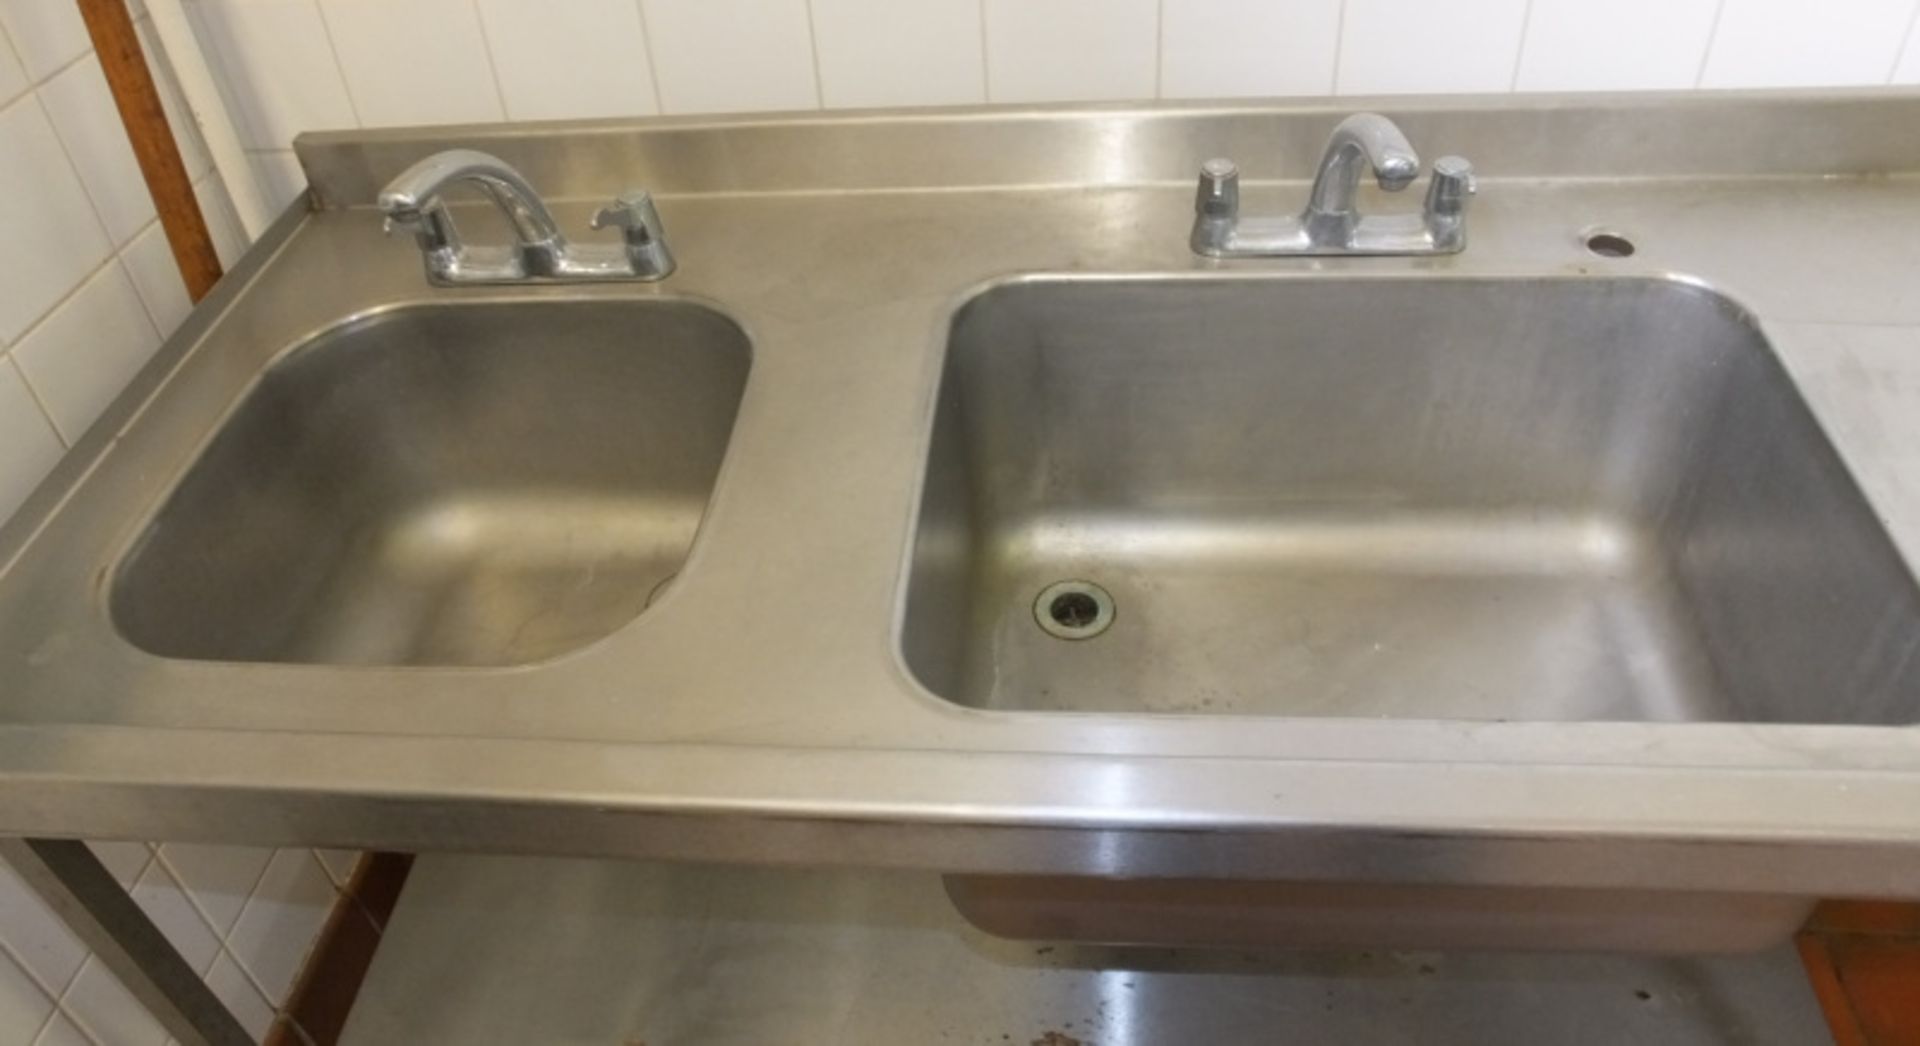 Stainless Steel Double Sink Unit - L2250 x D700 x H930mm - Image 3 of 3